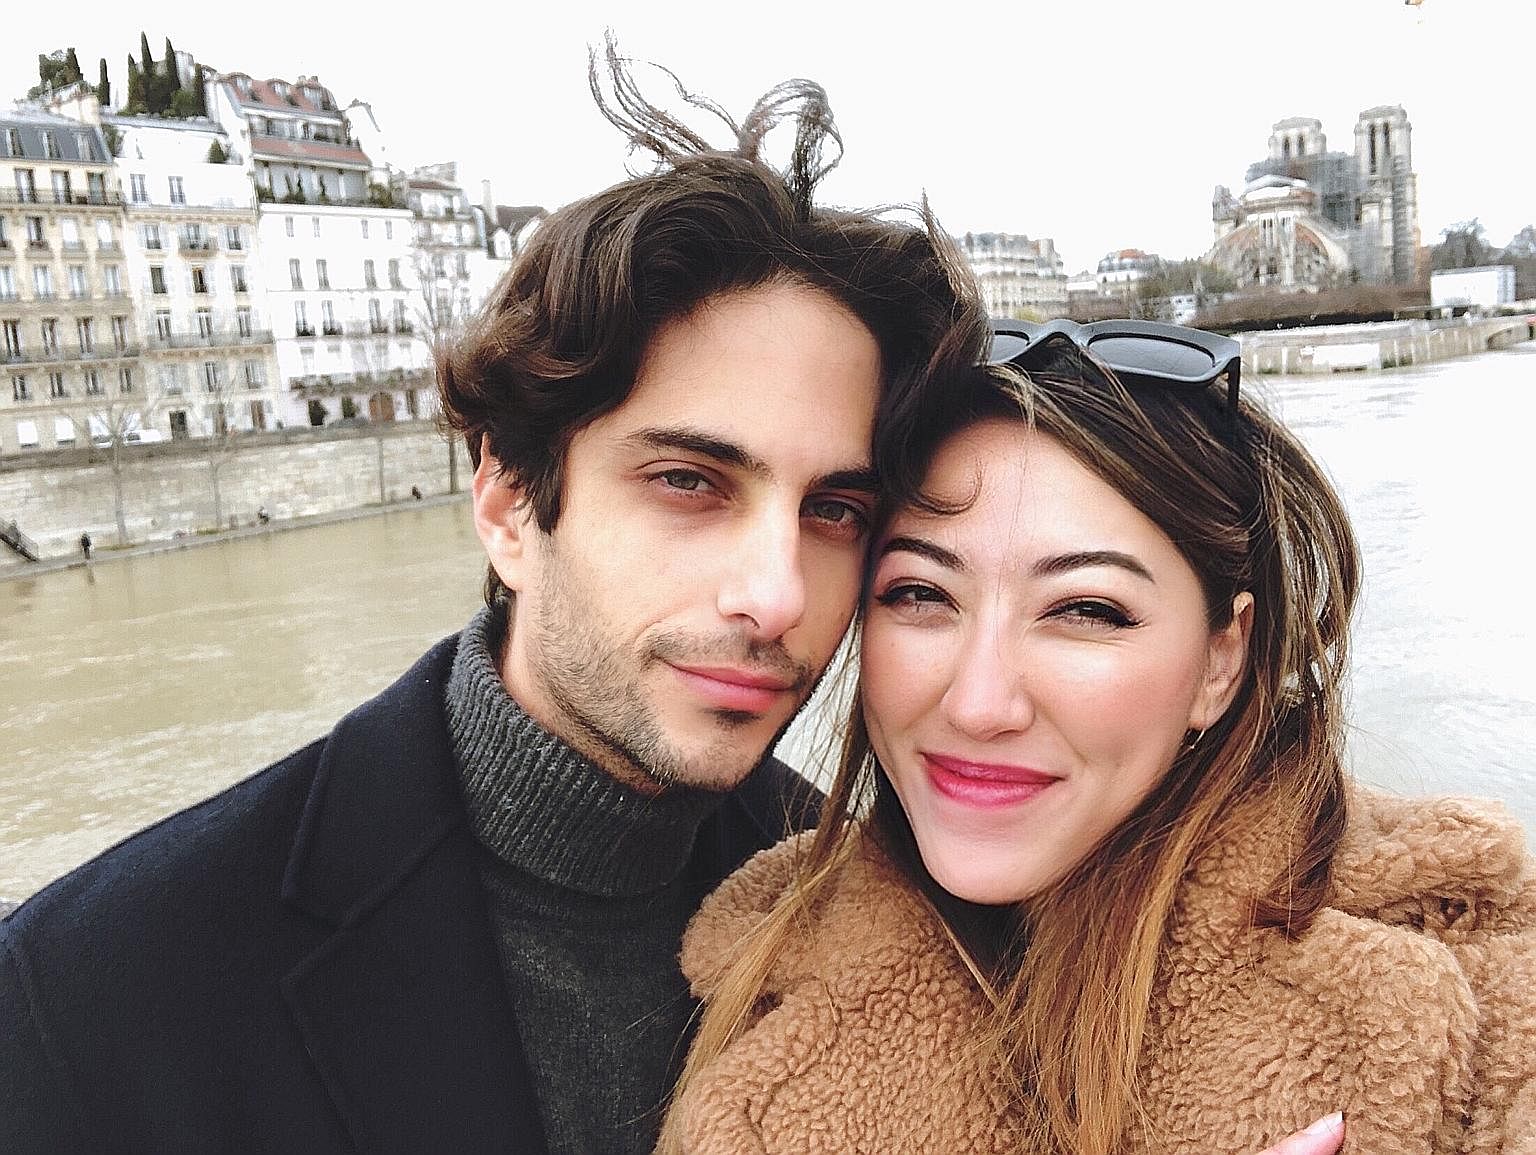 Singaporean Low Shu Min and her Greek boyfriend George Konstantakakis have been apart for more than two months. 